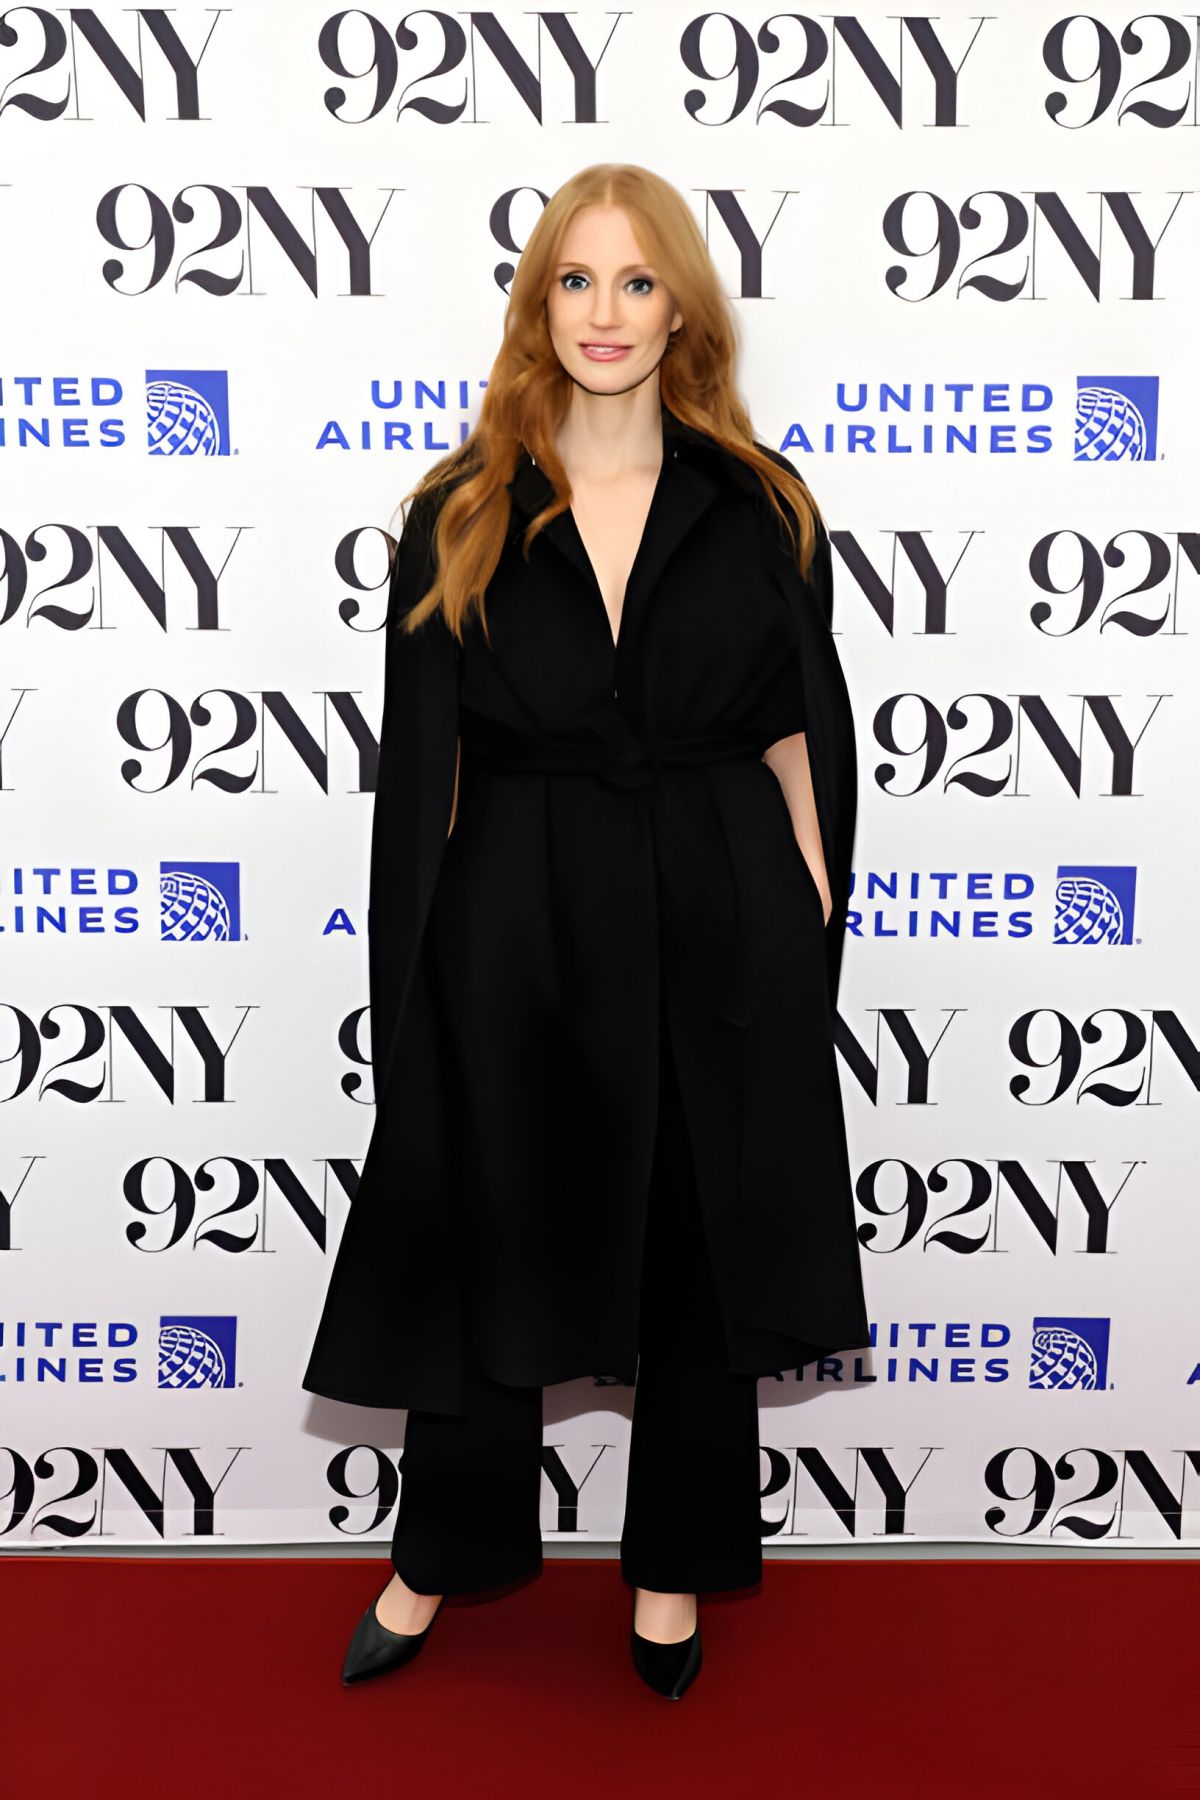 Jessica Chastain in black outfit at 92NY Memory Talk in New York